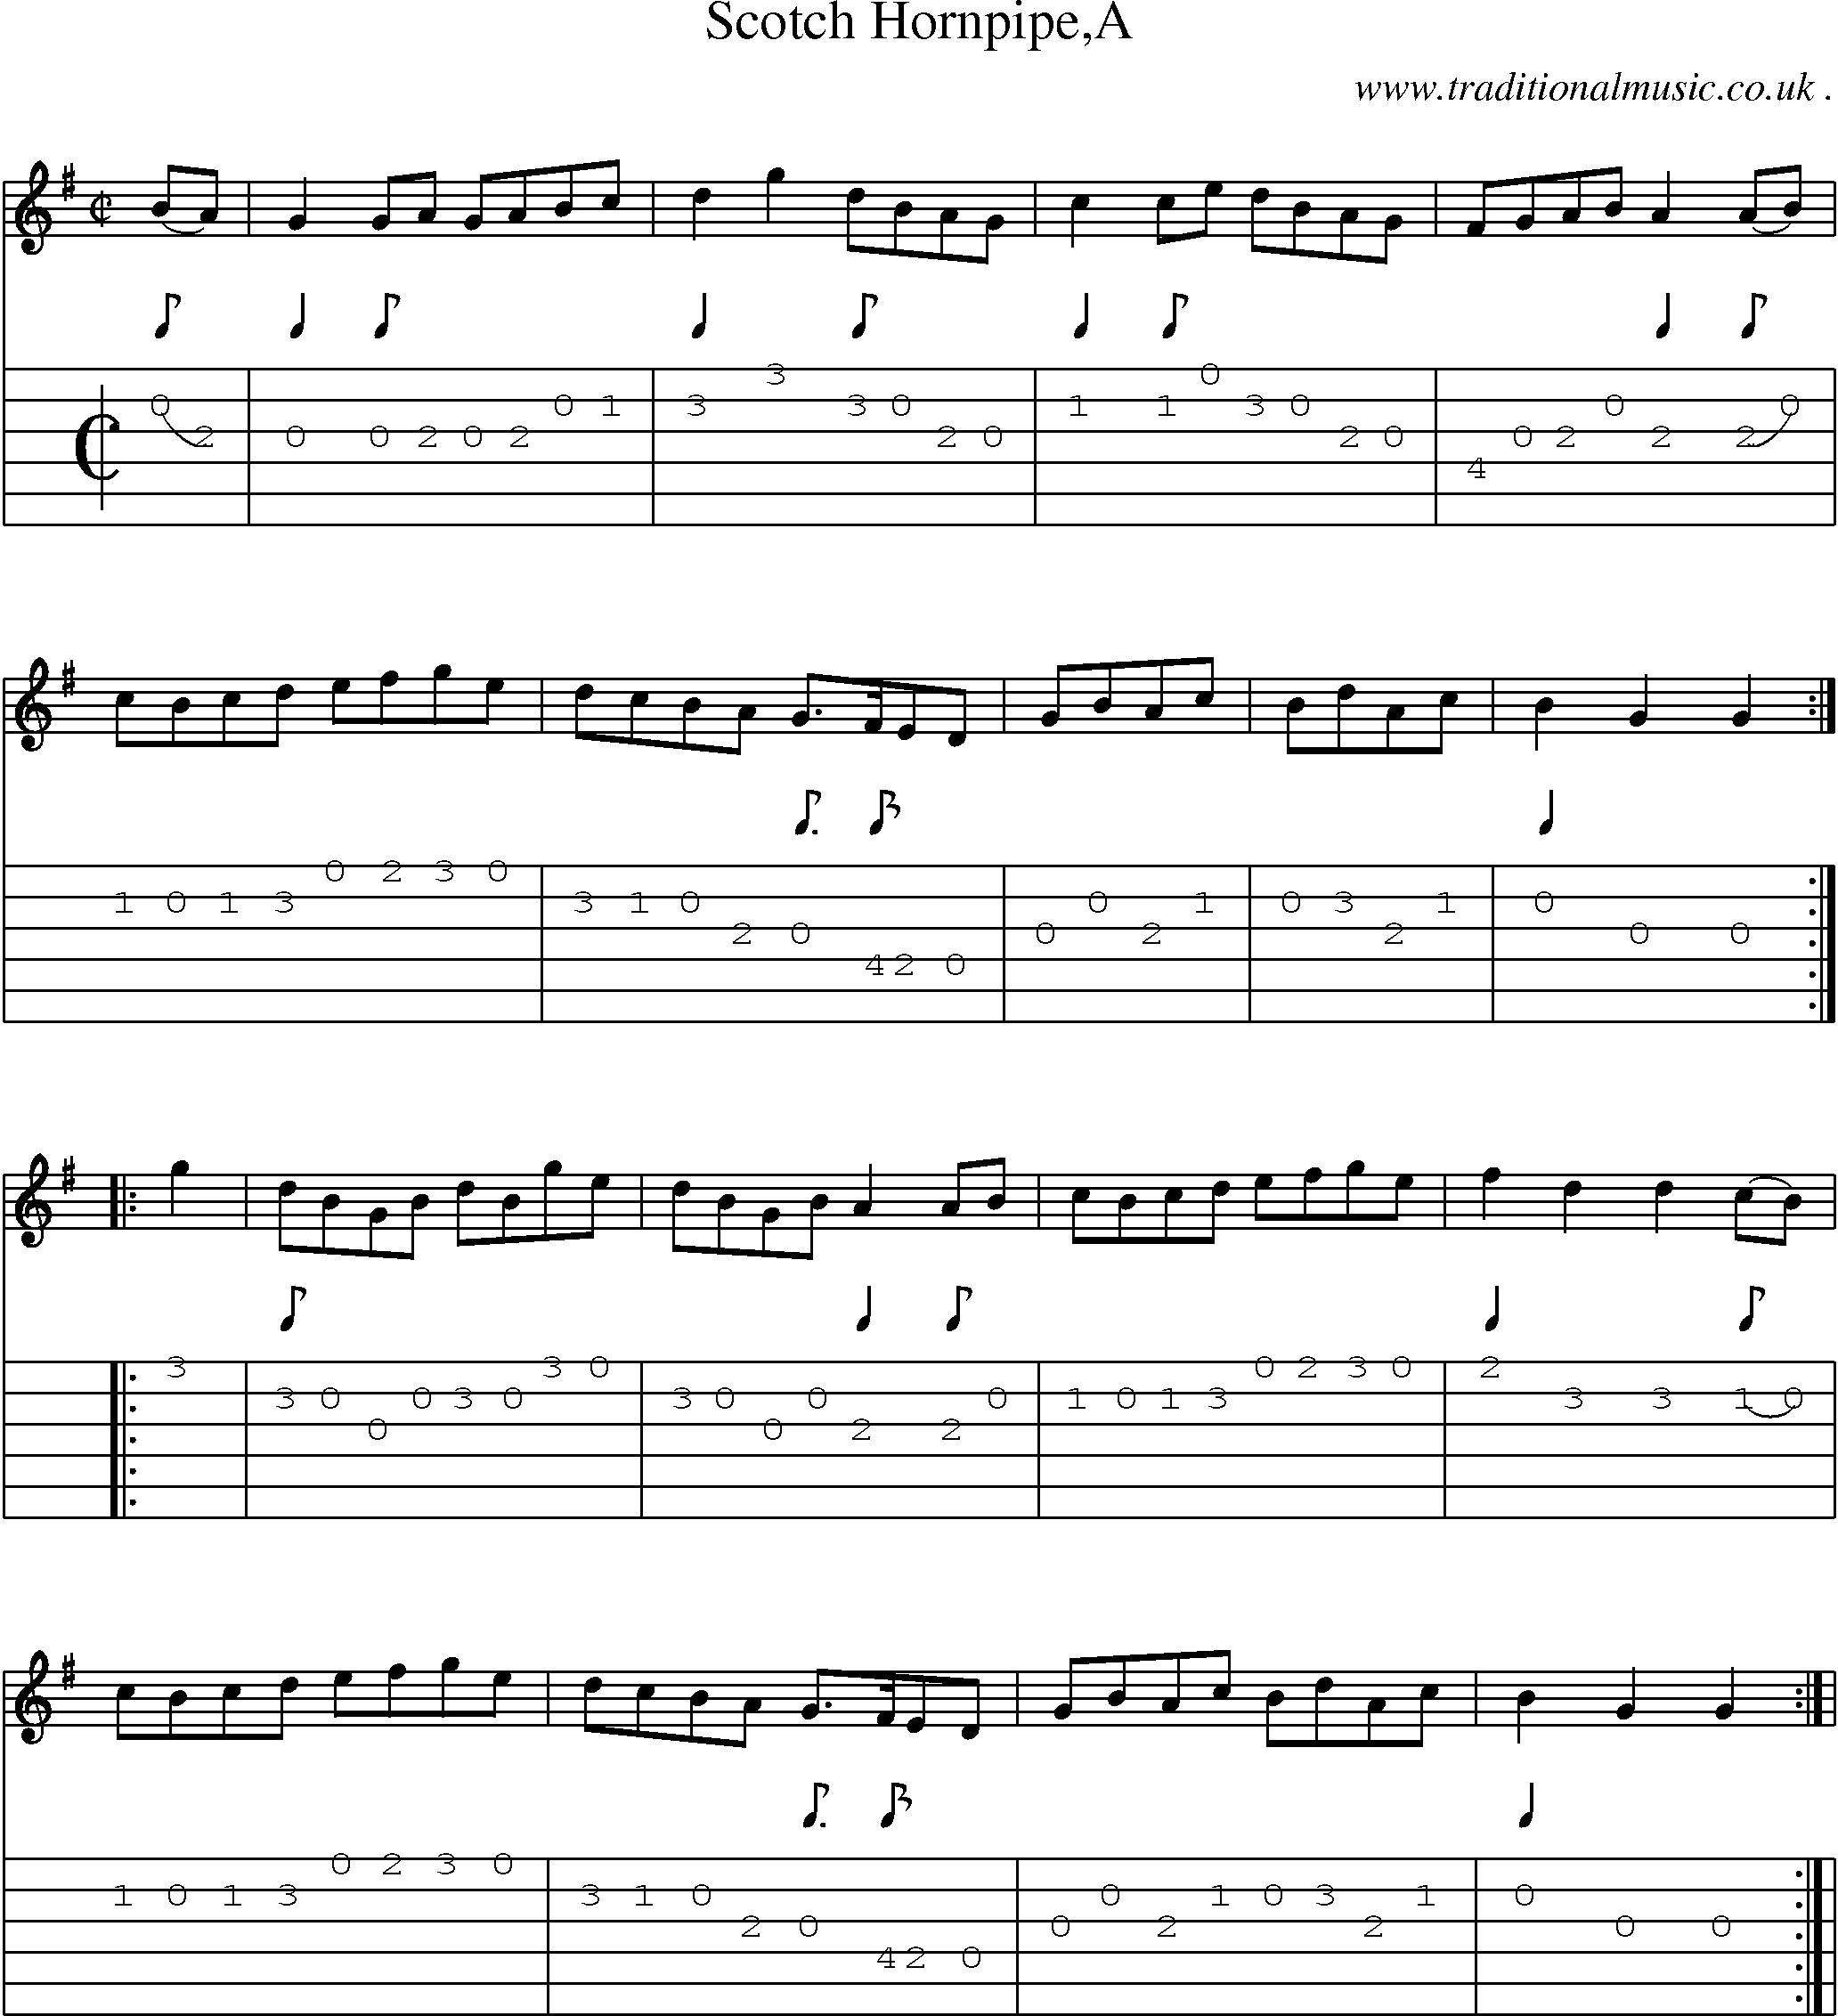 Sheet-Music and Guitar Tabs for Scotch Hornpipea